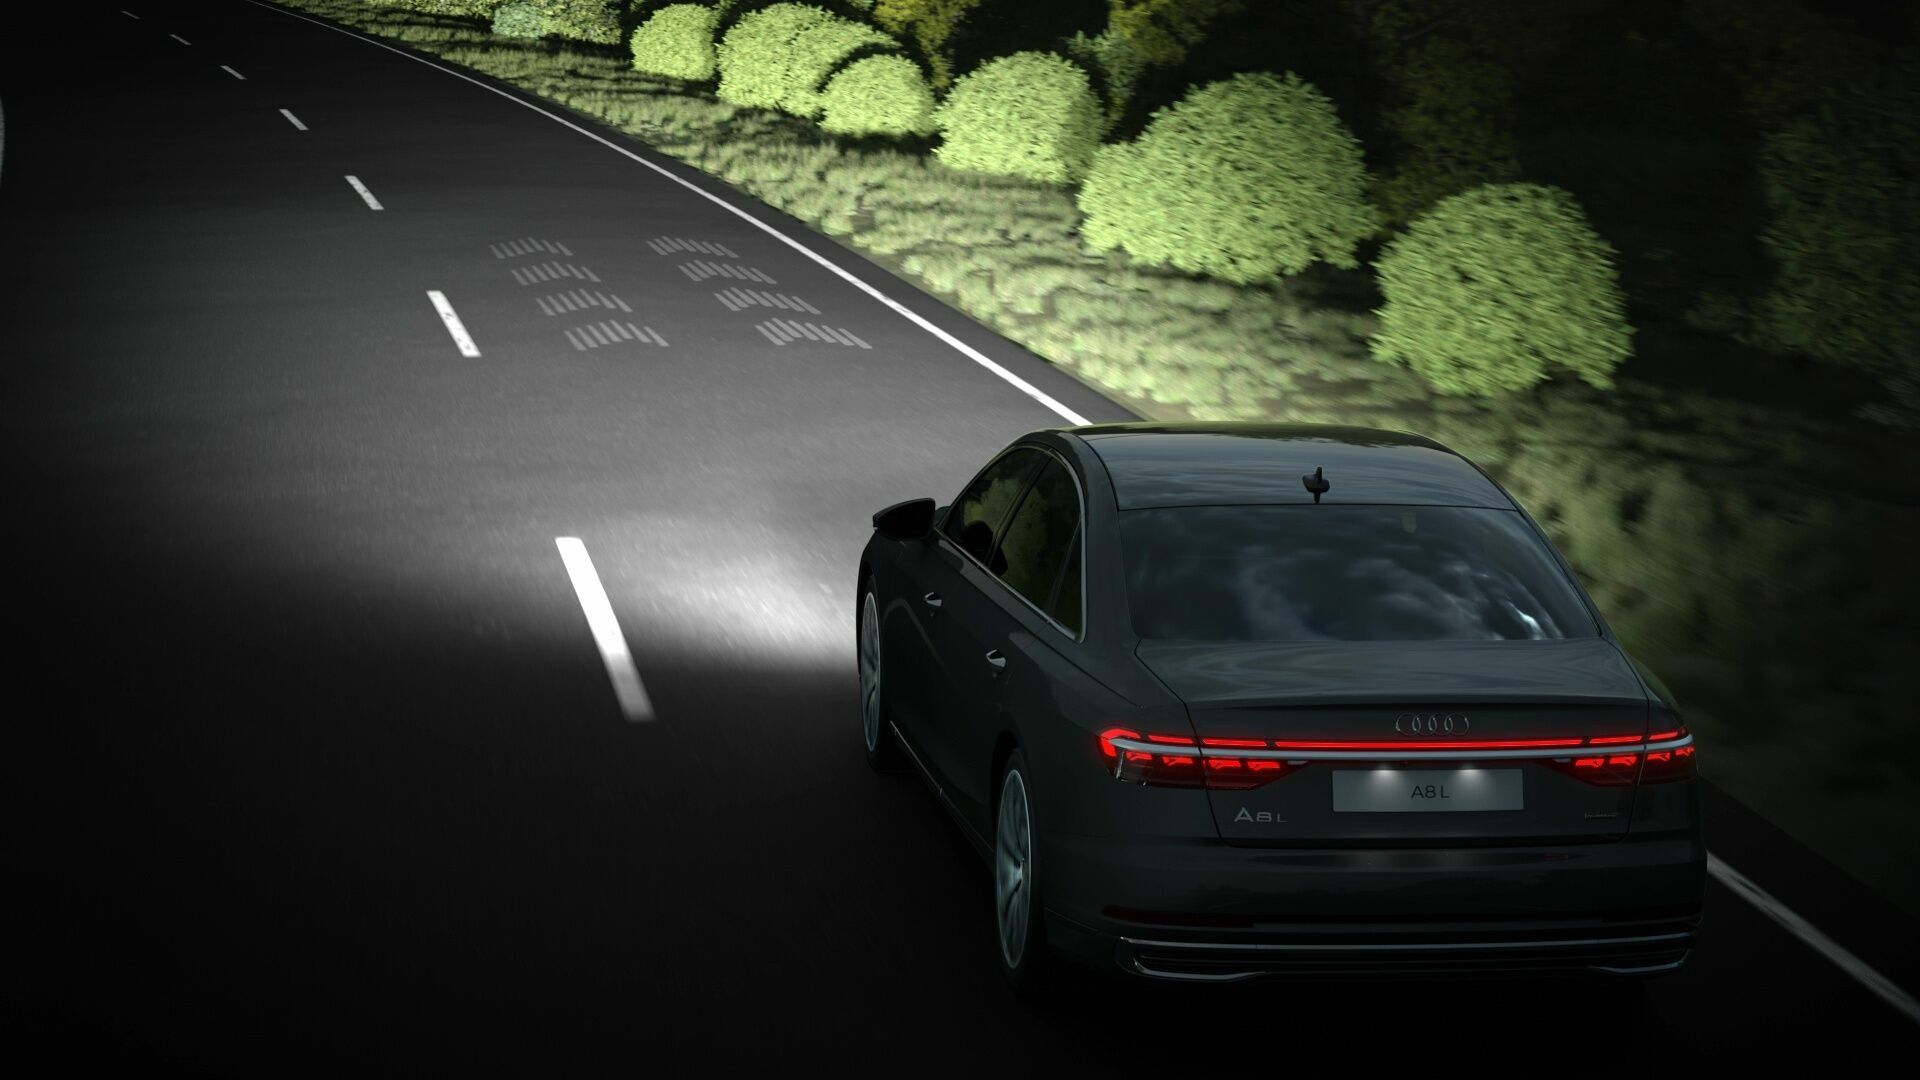 Animation: Digital Matrix LED and digital OLED technology in the new Audi A8 L